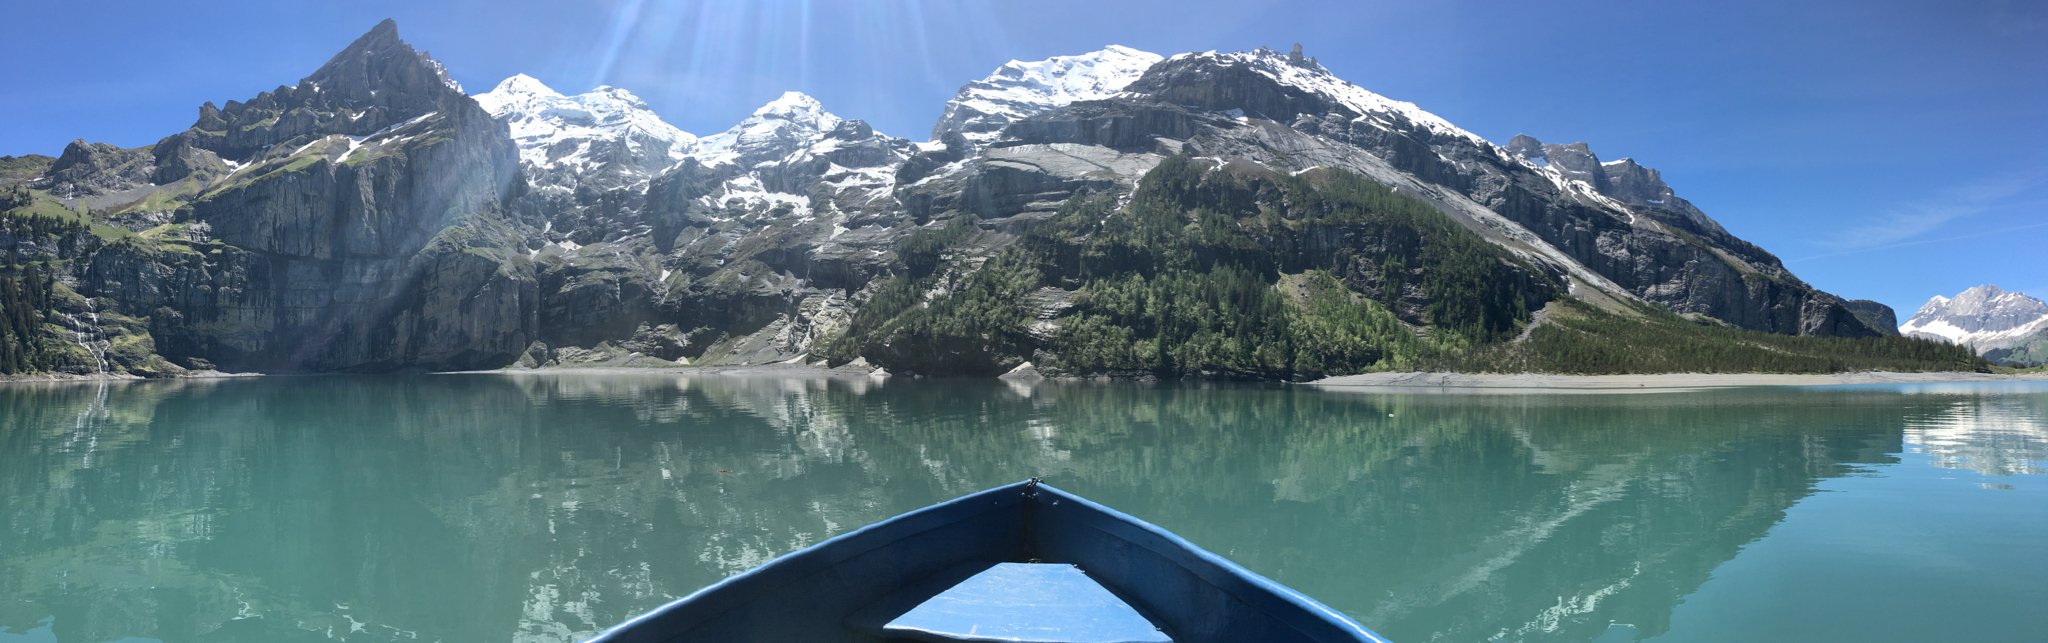 On a boat in the middle of Oeschinensee